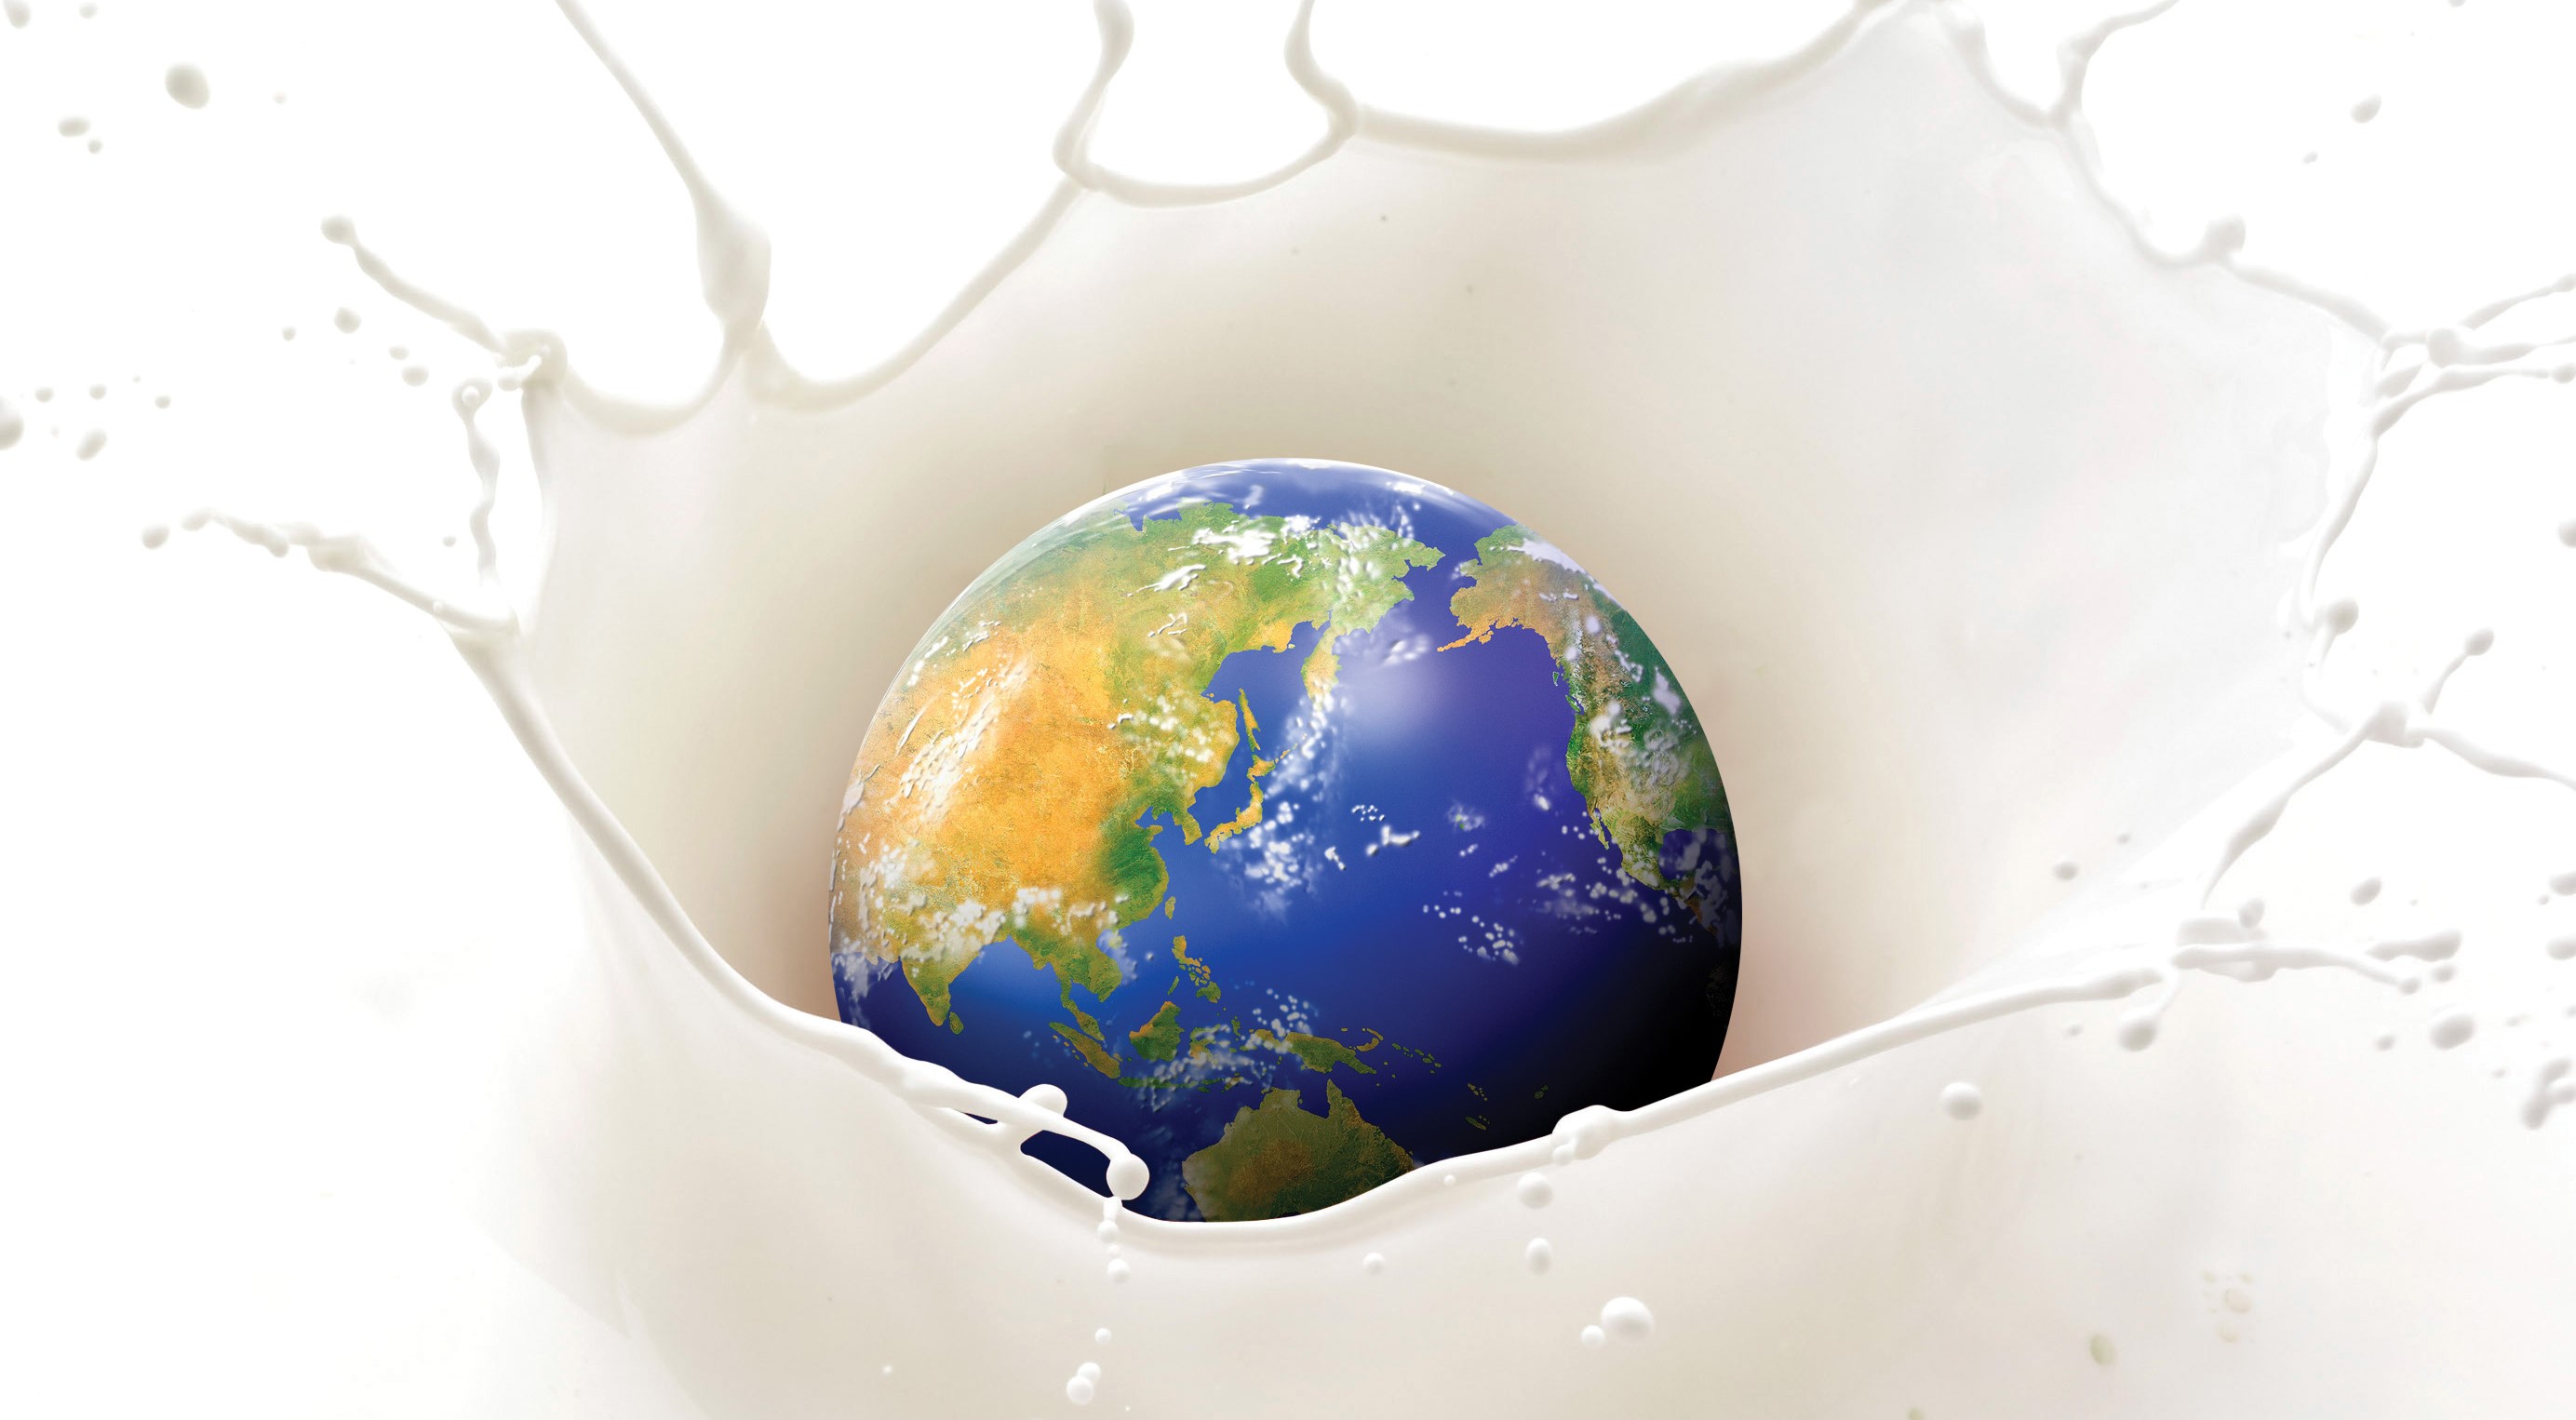 Earth being dropped into a glass of milk